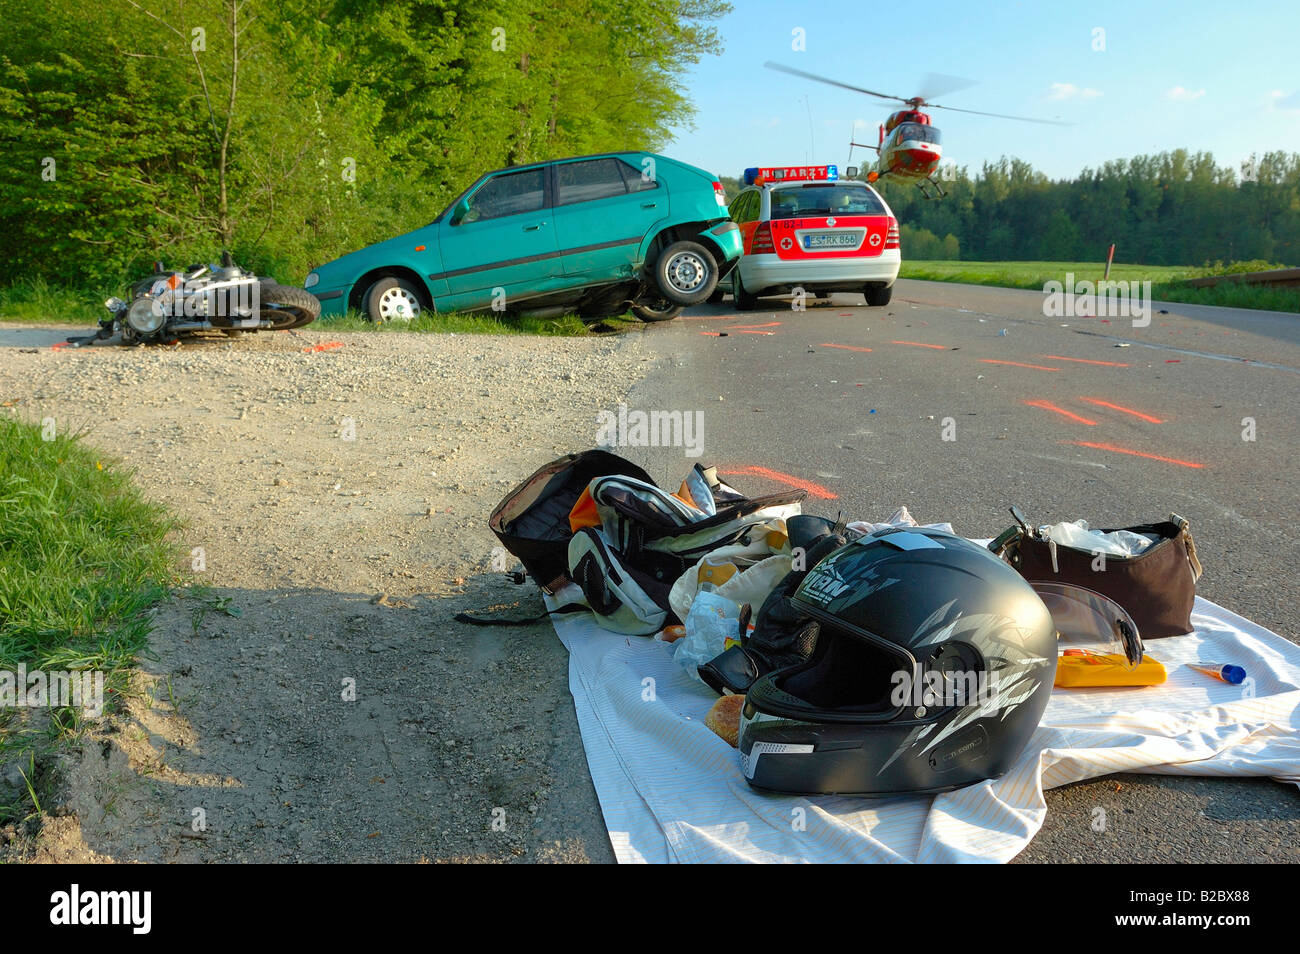 Scene of a car and motorcycle accident, rescue helicopter lifting off carrying a female victim, she died the following morning  Stock Photo